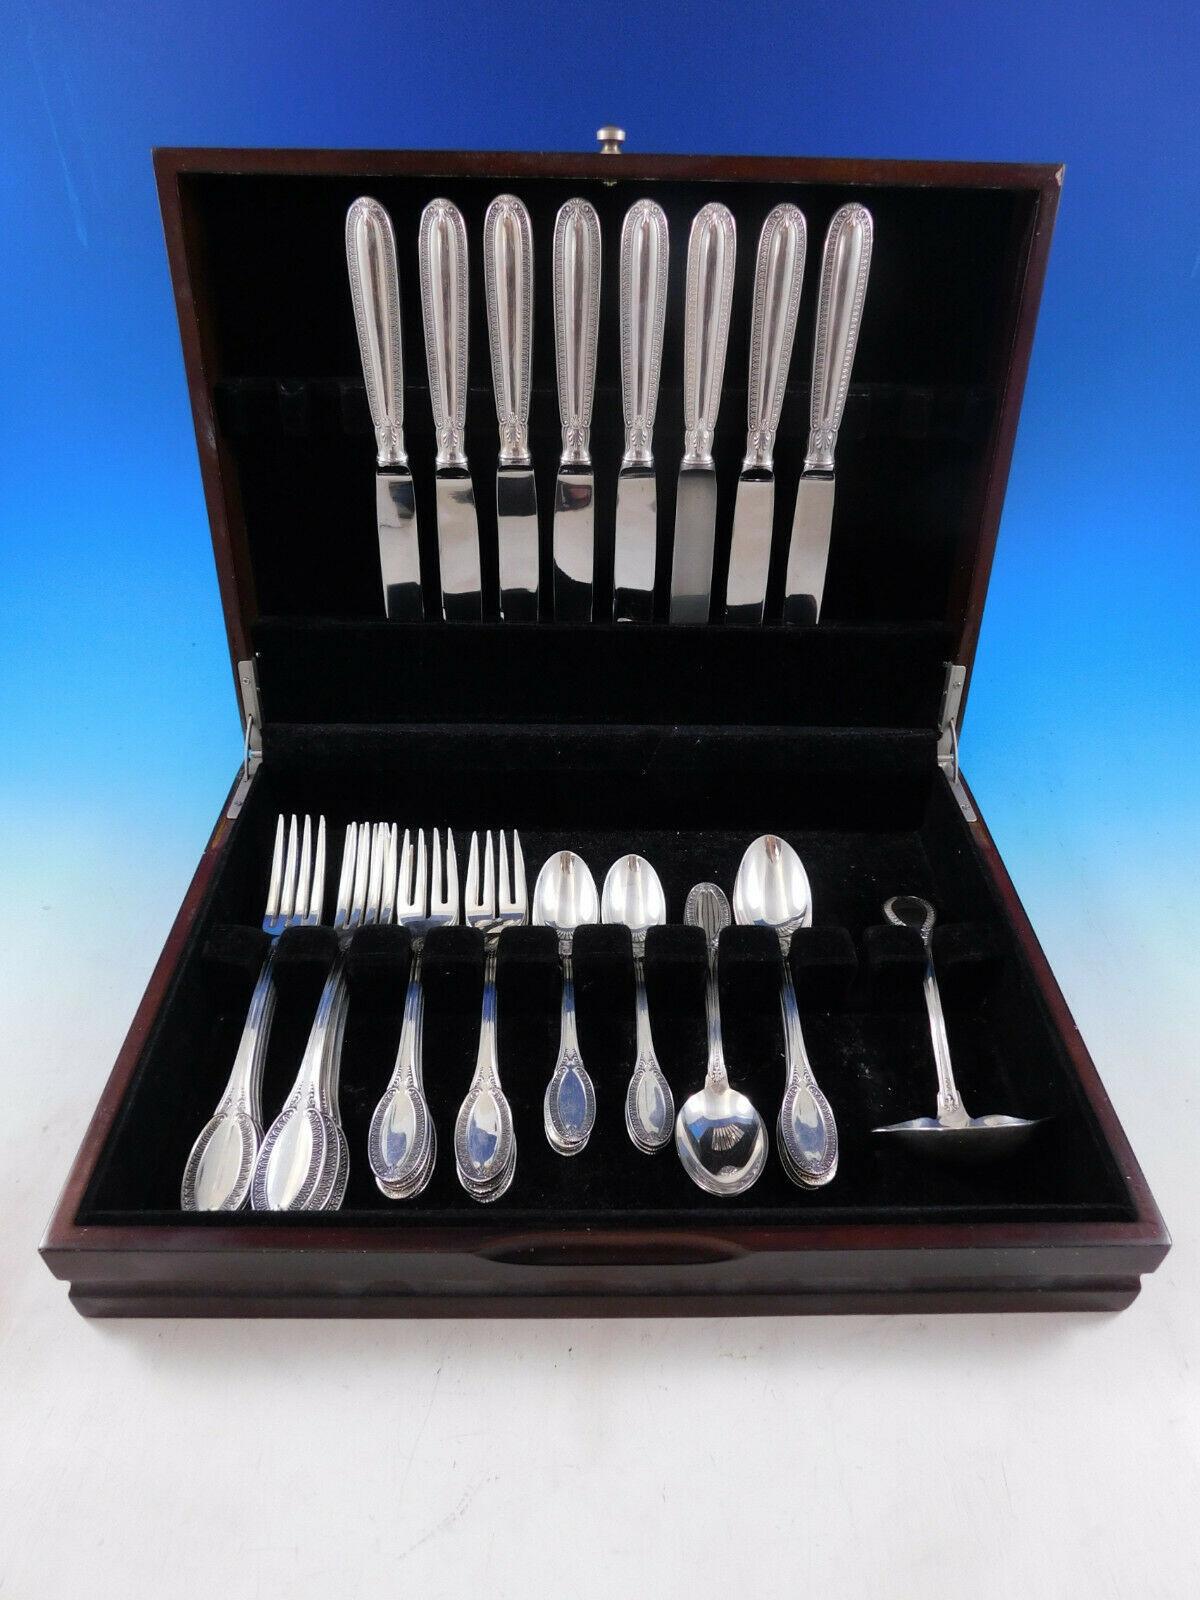 Scarce Continental size Impero by Wallace Italy Sterling Silver Flatware set, 41 pieces. The pieces are large, heavy, and impressive. This set includes:

8 Continental Size Knives, 9 5/8